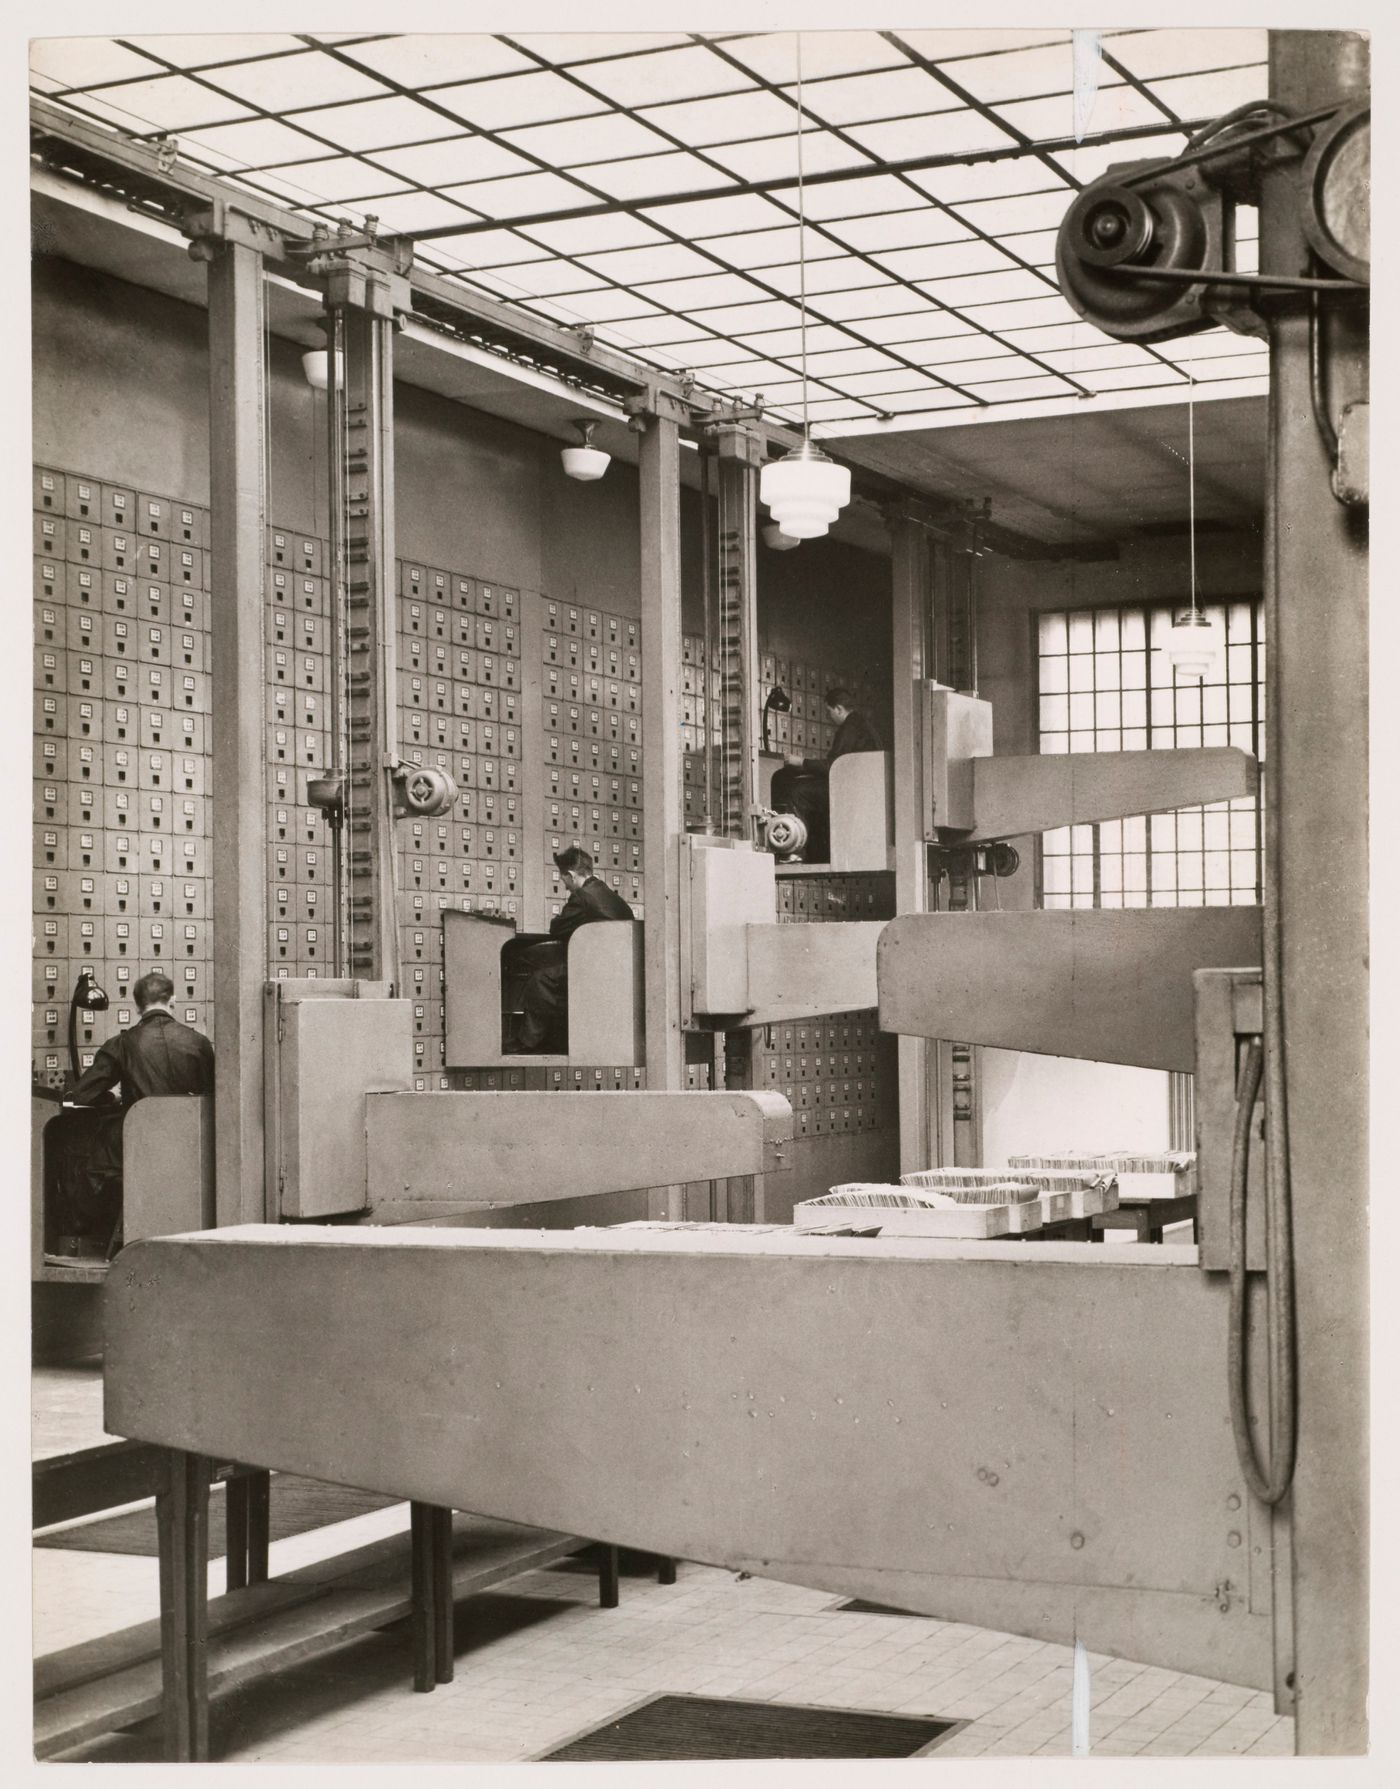 Interior view of the Central Social Insurance Institution showing men working in mobile work stations used to access the card catalog drawers, Prague, Czechoslovakia (now Czech Republic)